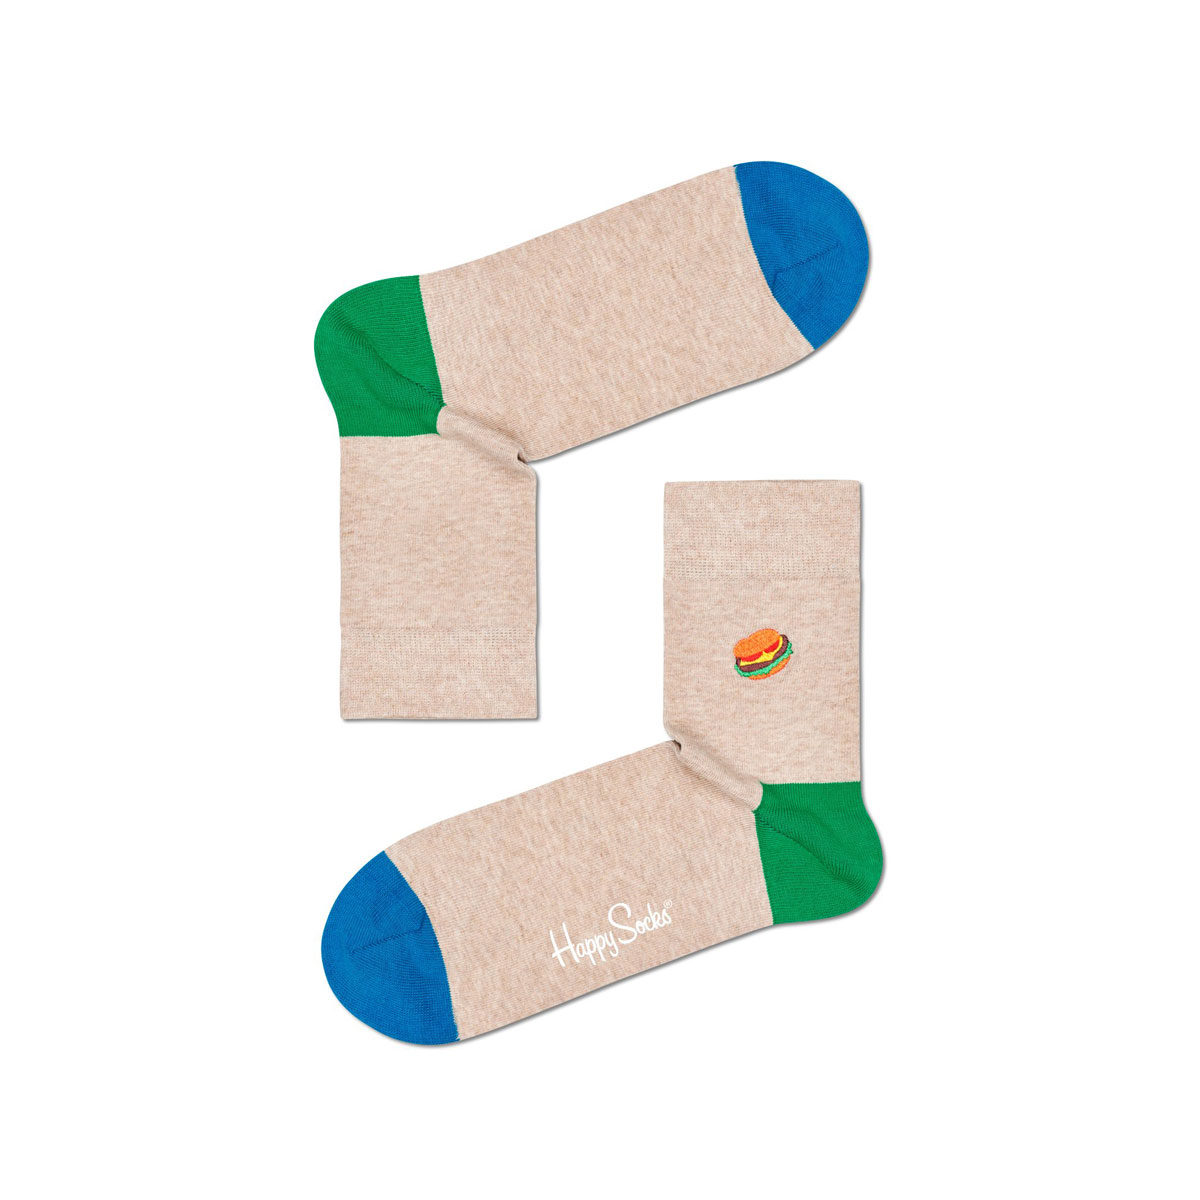 Embroidery Burger Half Crew Sock <img src="/banner_images/banner_0000000180.gif">